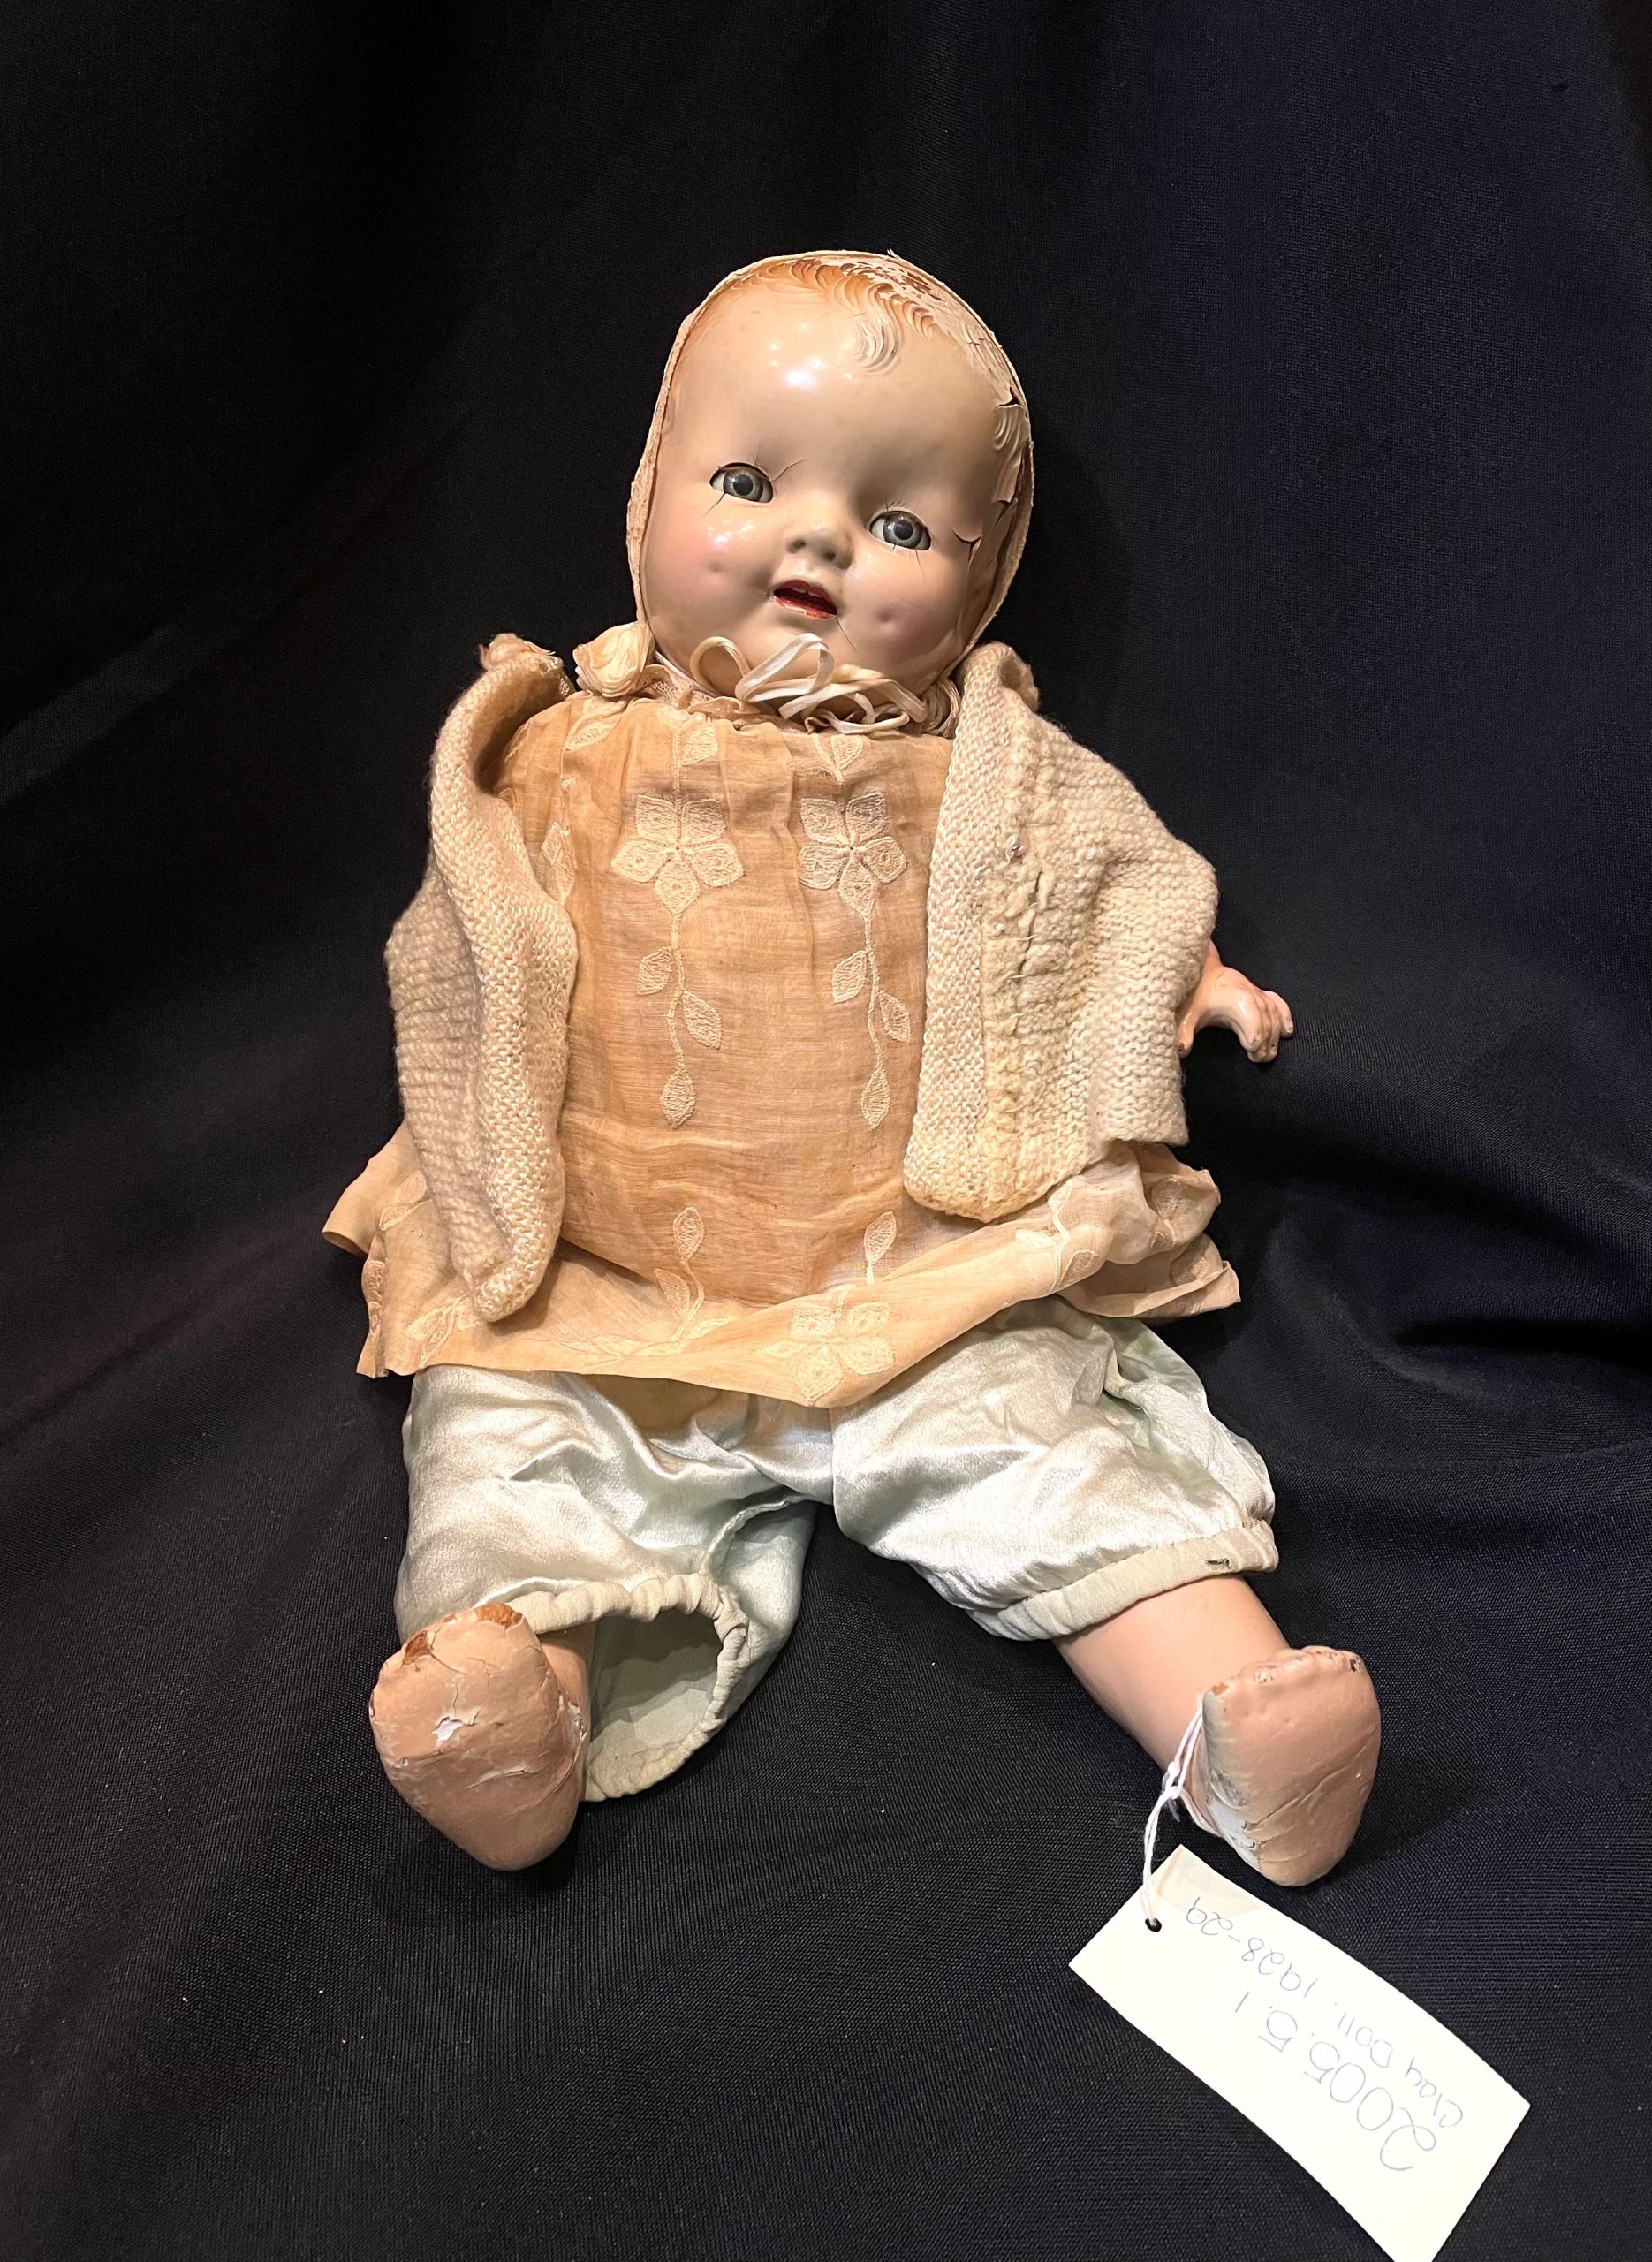 Doll in Westport Museum's collection.